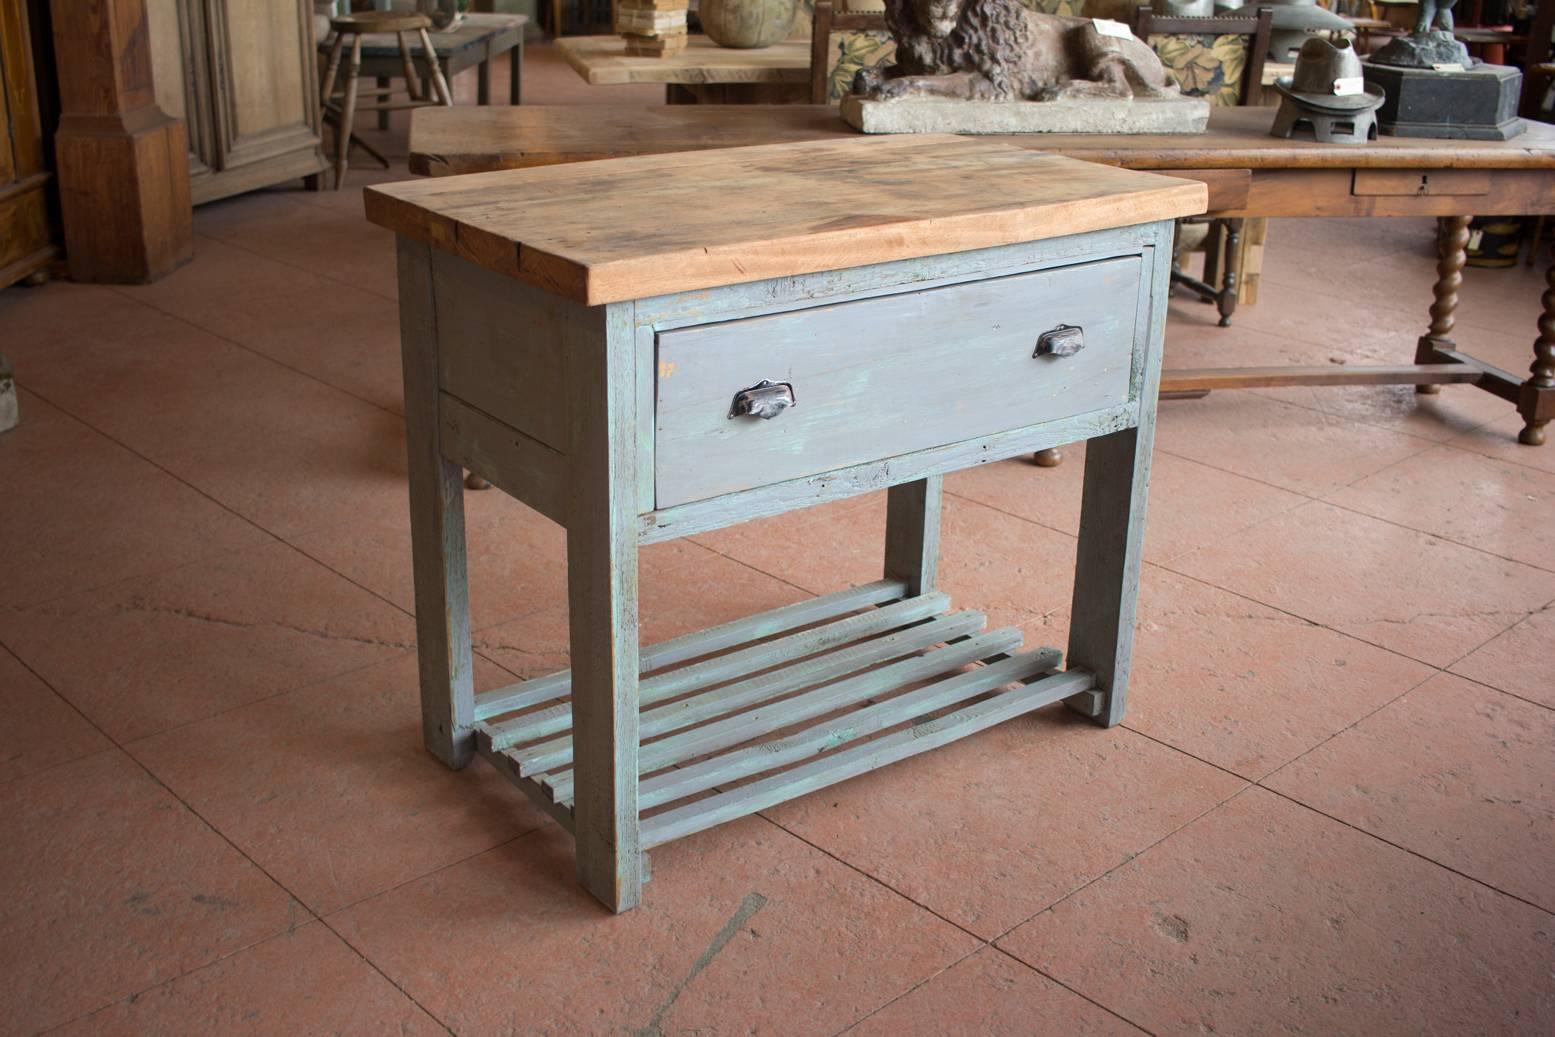 Vintage French kitchen work table with a chopping board top, deep drawer and slatted lower shelf.